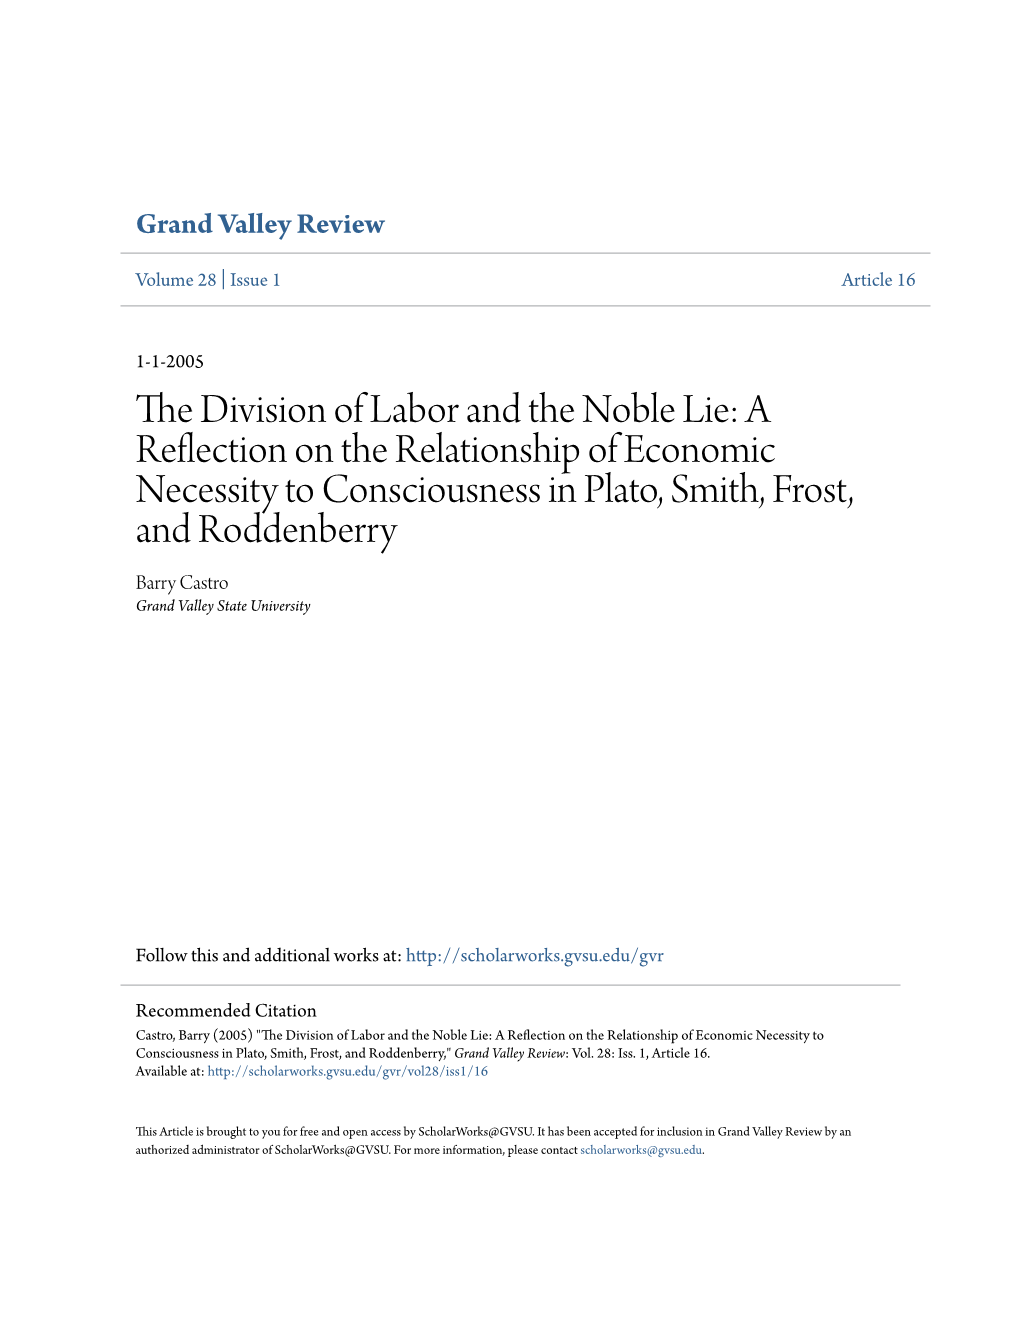 The Division of Labor and the Noble